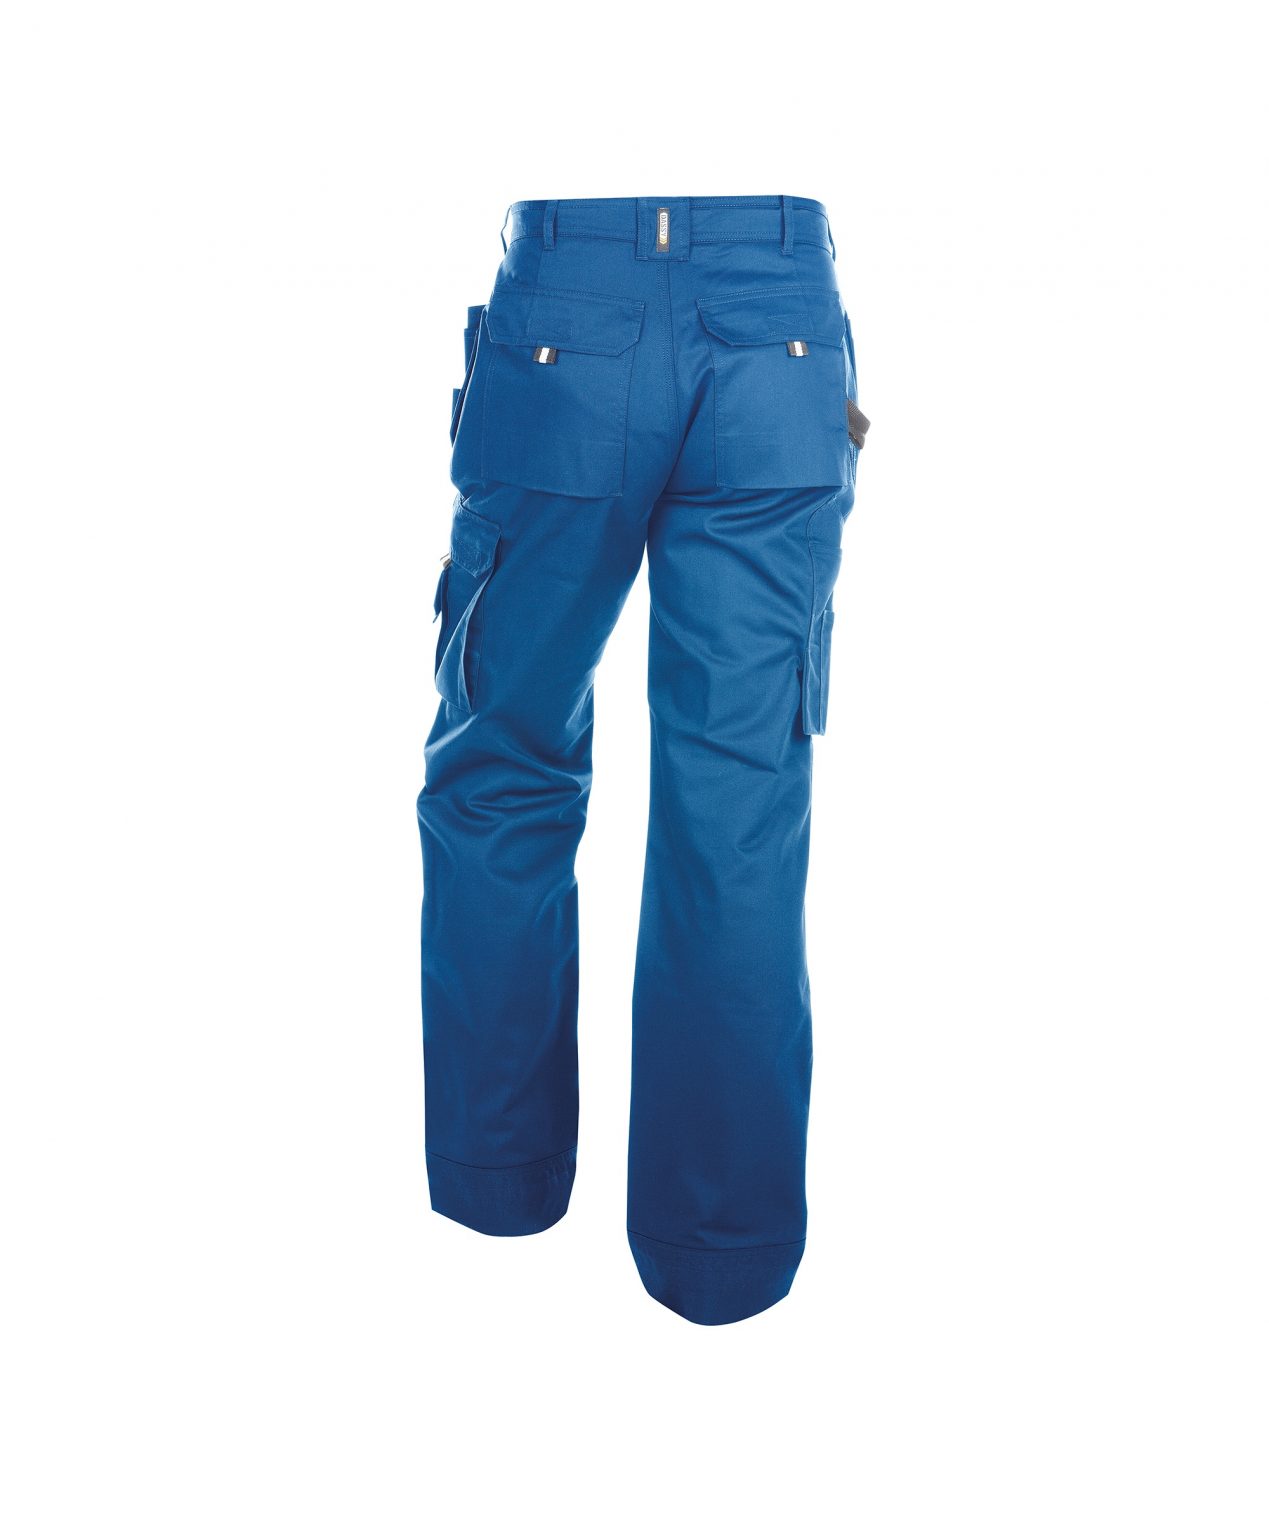 oxford trousers with holster pockets and knee pockets royal blue back